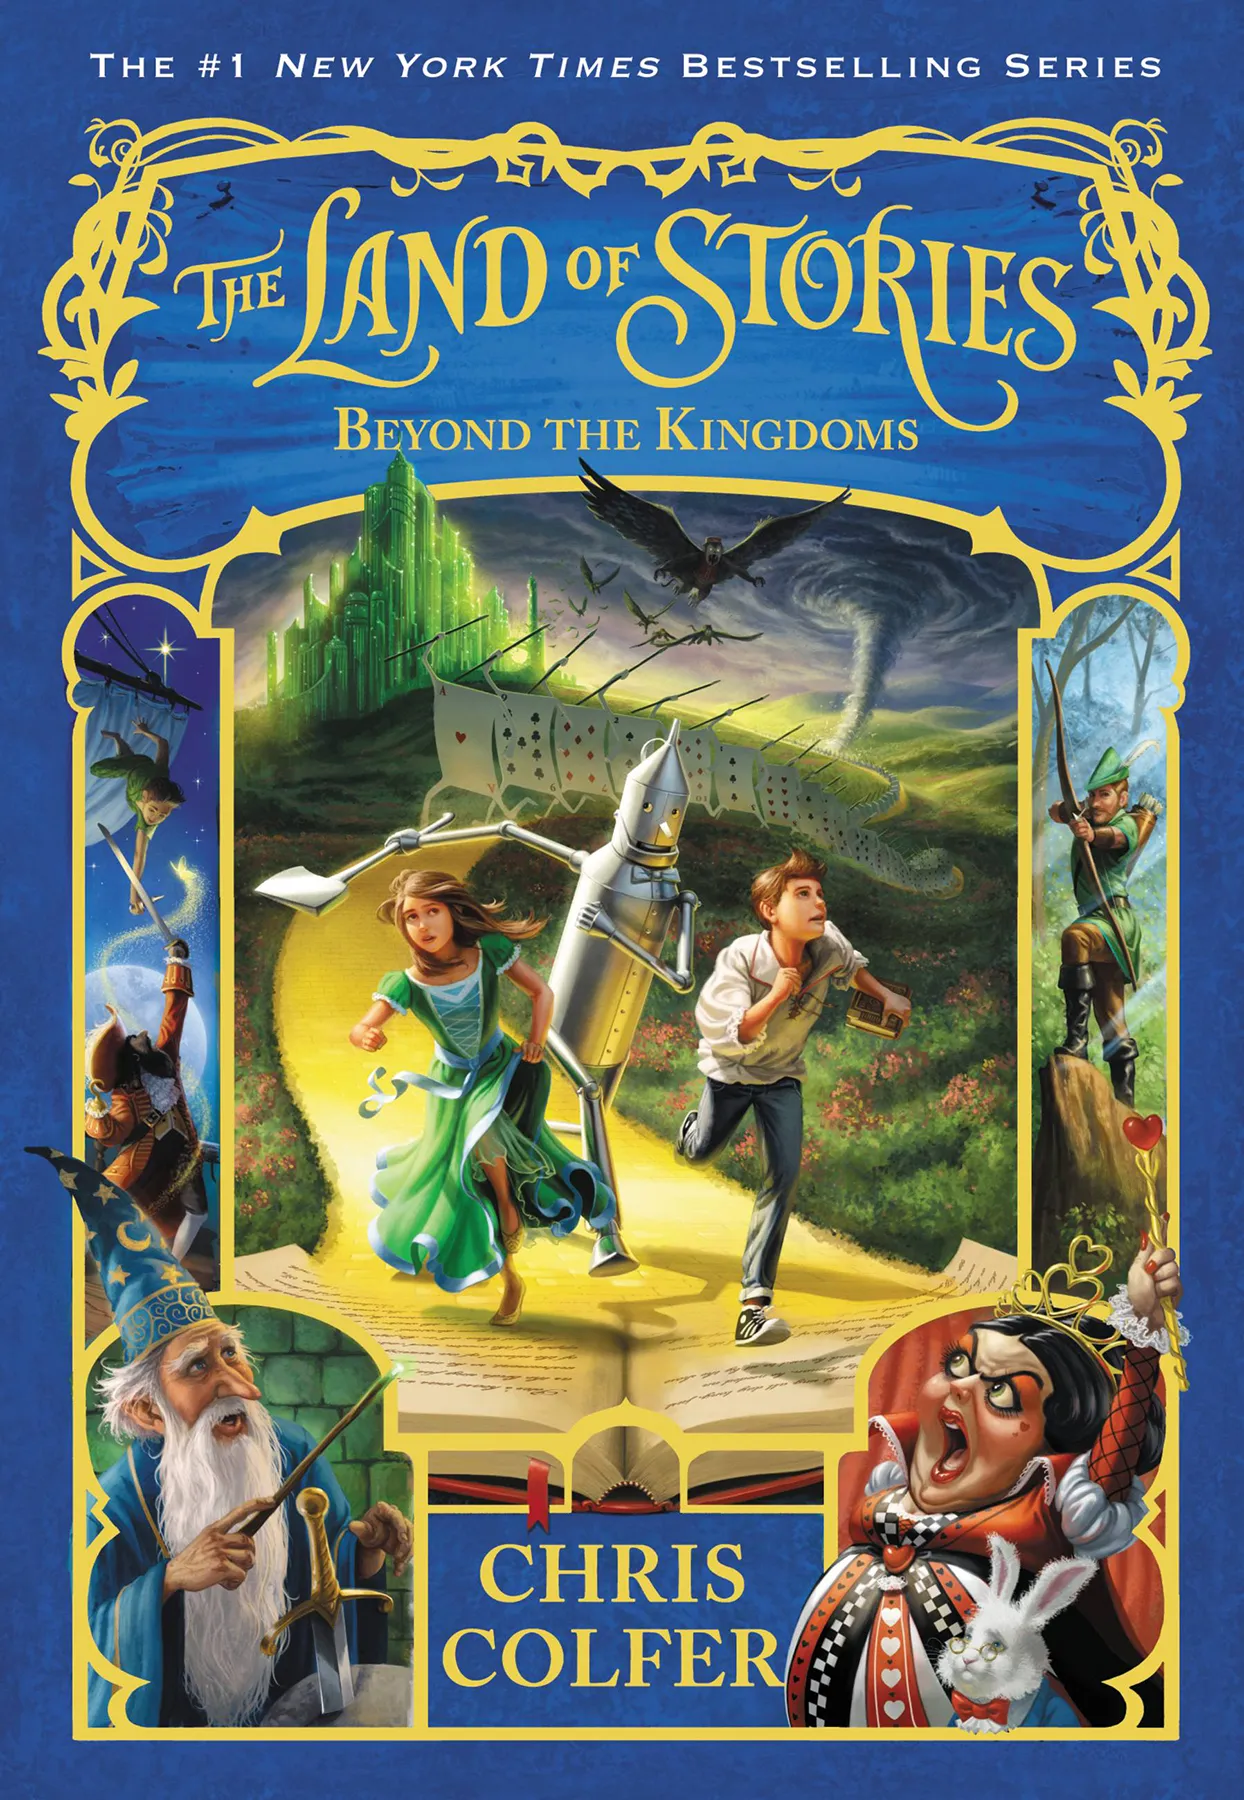 Beyond the Kingdoms (The Land of Stories #4)